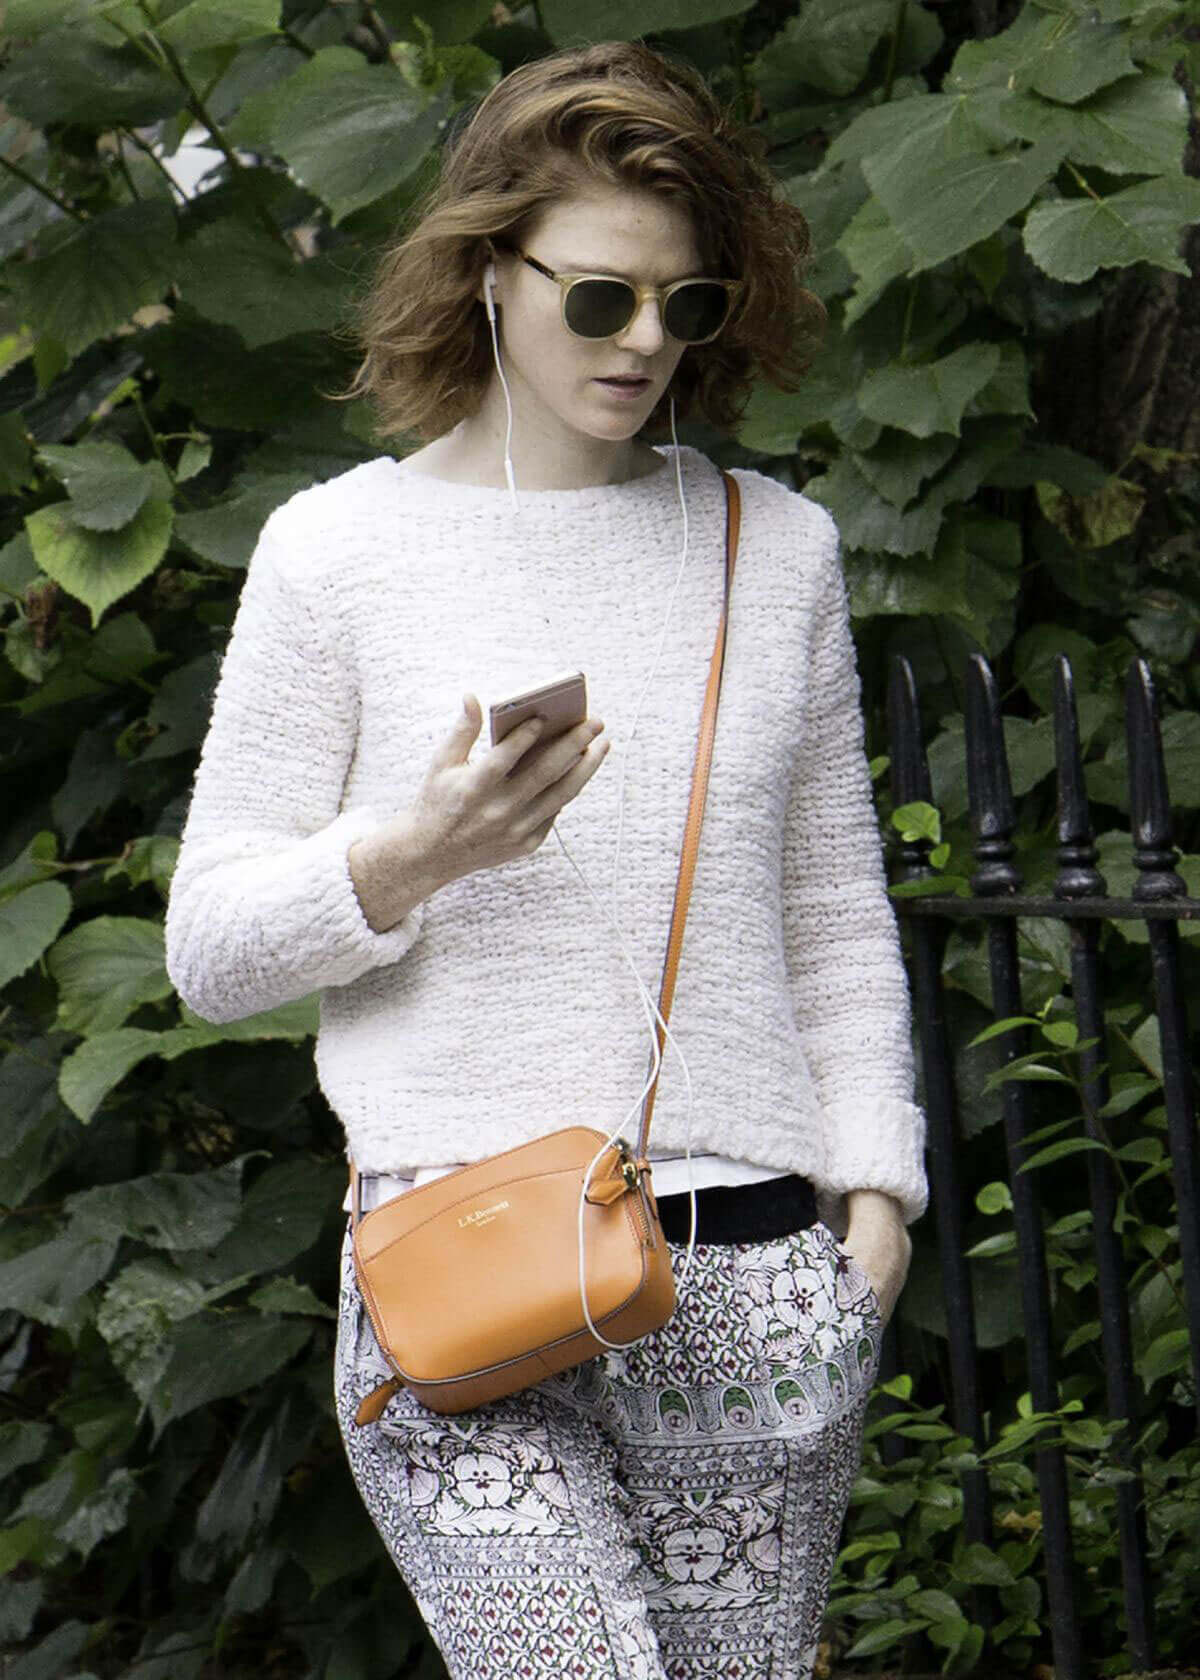 Rose Leslie Stills Out and About in London Photos